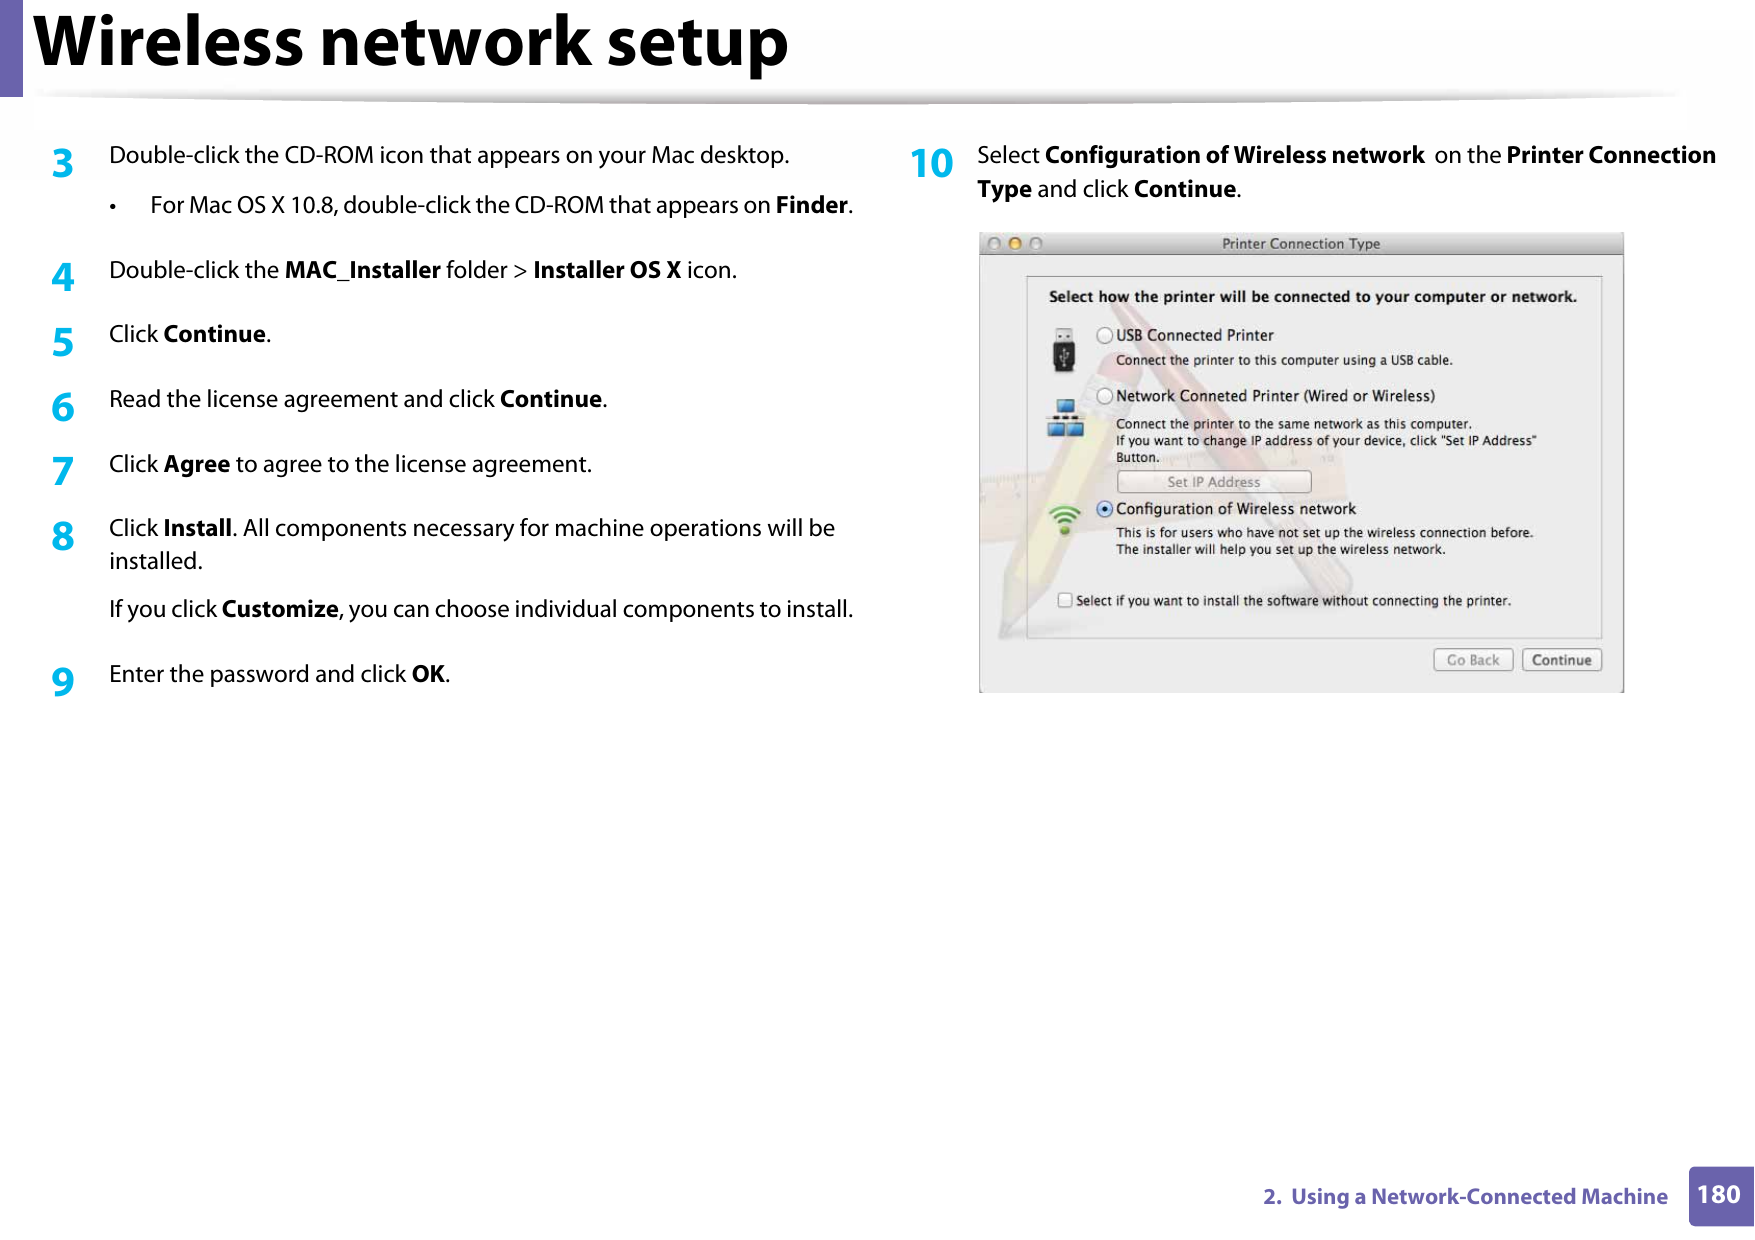 Wireless network setup1802.  Using a Network-Connected Machine3  Double-click the CD-ROM icon that appears on your Mac desktop.• For Mac OS X 10.8, double-click the CD-ROM that appears on Finder.4  Double-click the MAC_Installer folder &gt; Installer OS X icon.5  Click Continue.6  Read the license agreement and click Continue.7  Click Agree to agree to the license agreement.8  Click Install. All components necessary for machine operations will be installed. If you click Customize, you can choose individual components to install.9  Enter the password and click OK.10  Select Configuration of Wireless network  on the Printer Connection Type and click Continue. 